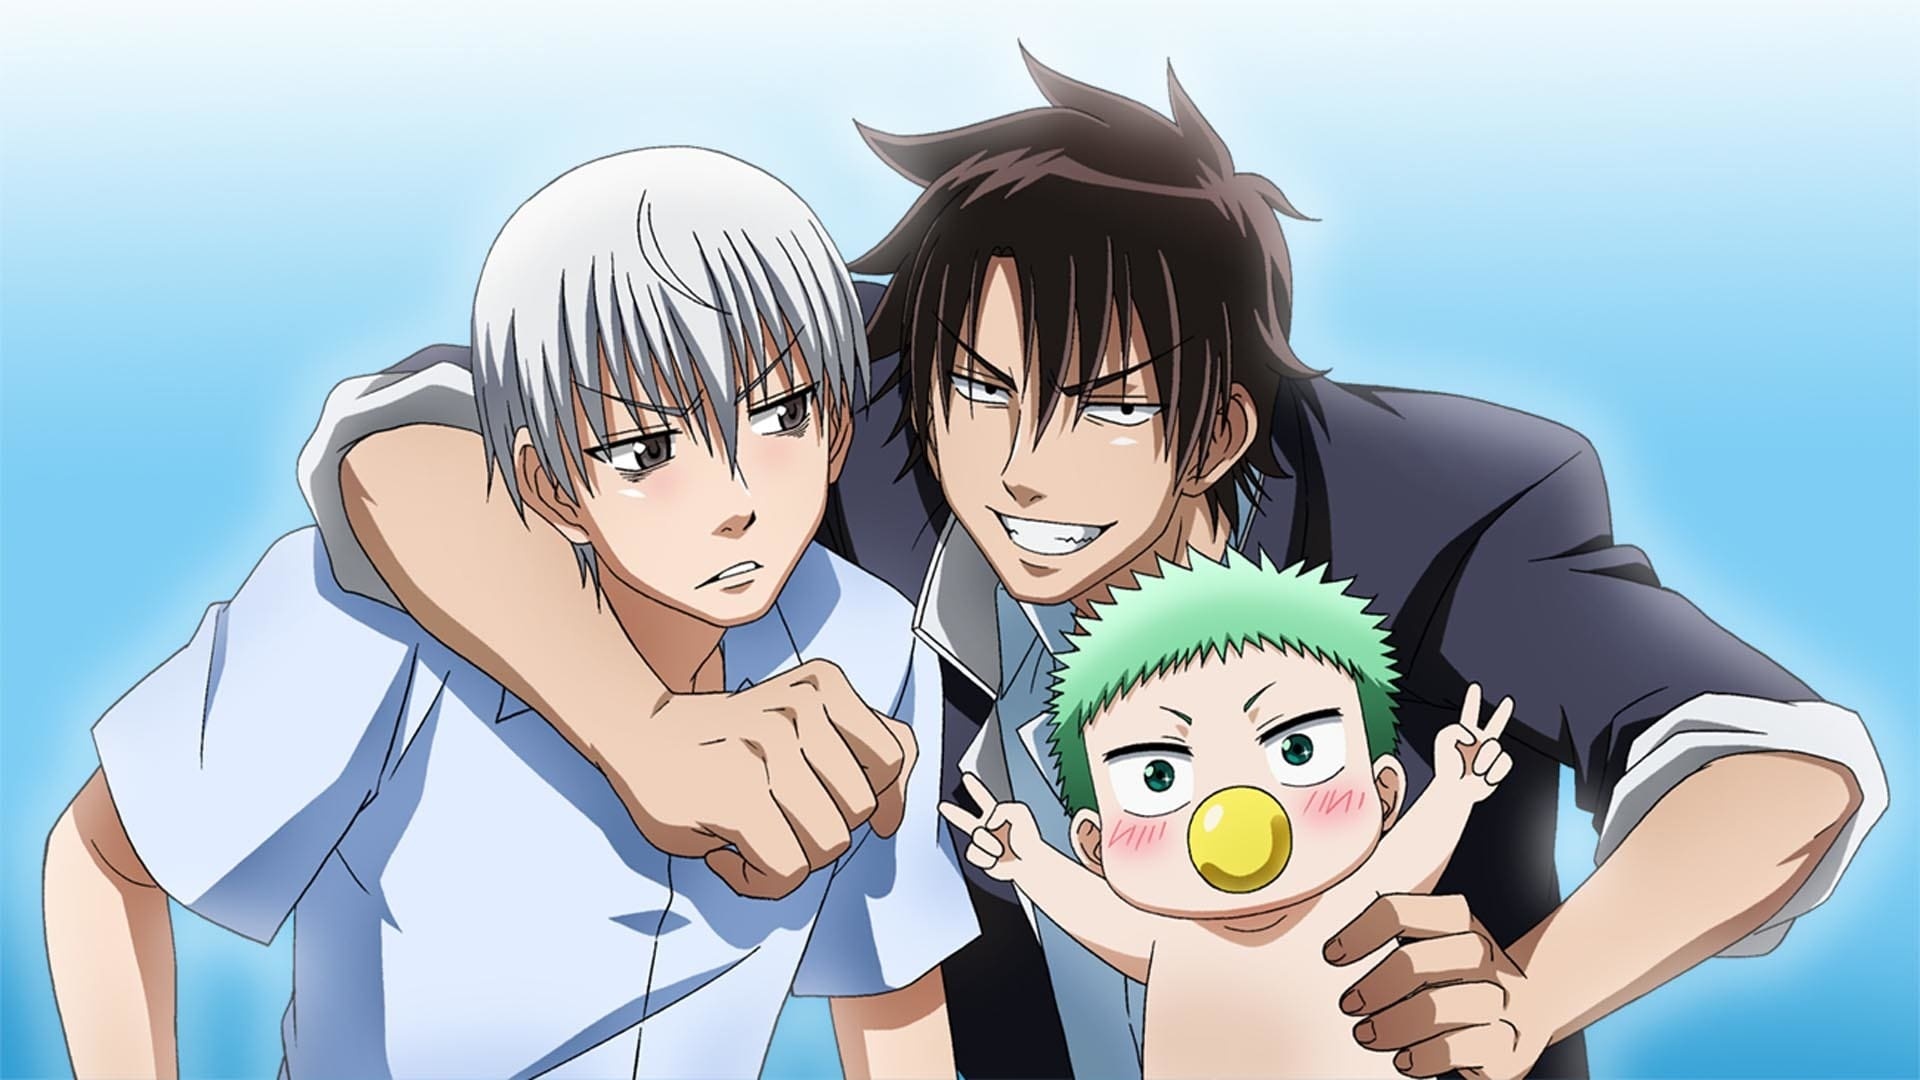 Beelzebub Anime, Similar anime, Exciting recommendations, Must-watch, 1920x1080 Full HD Desktop